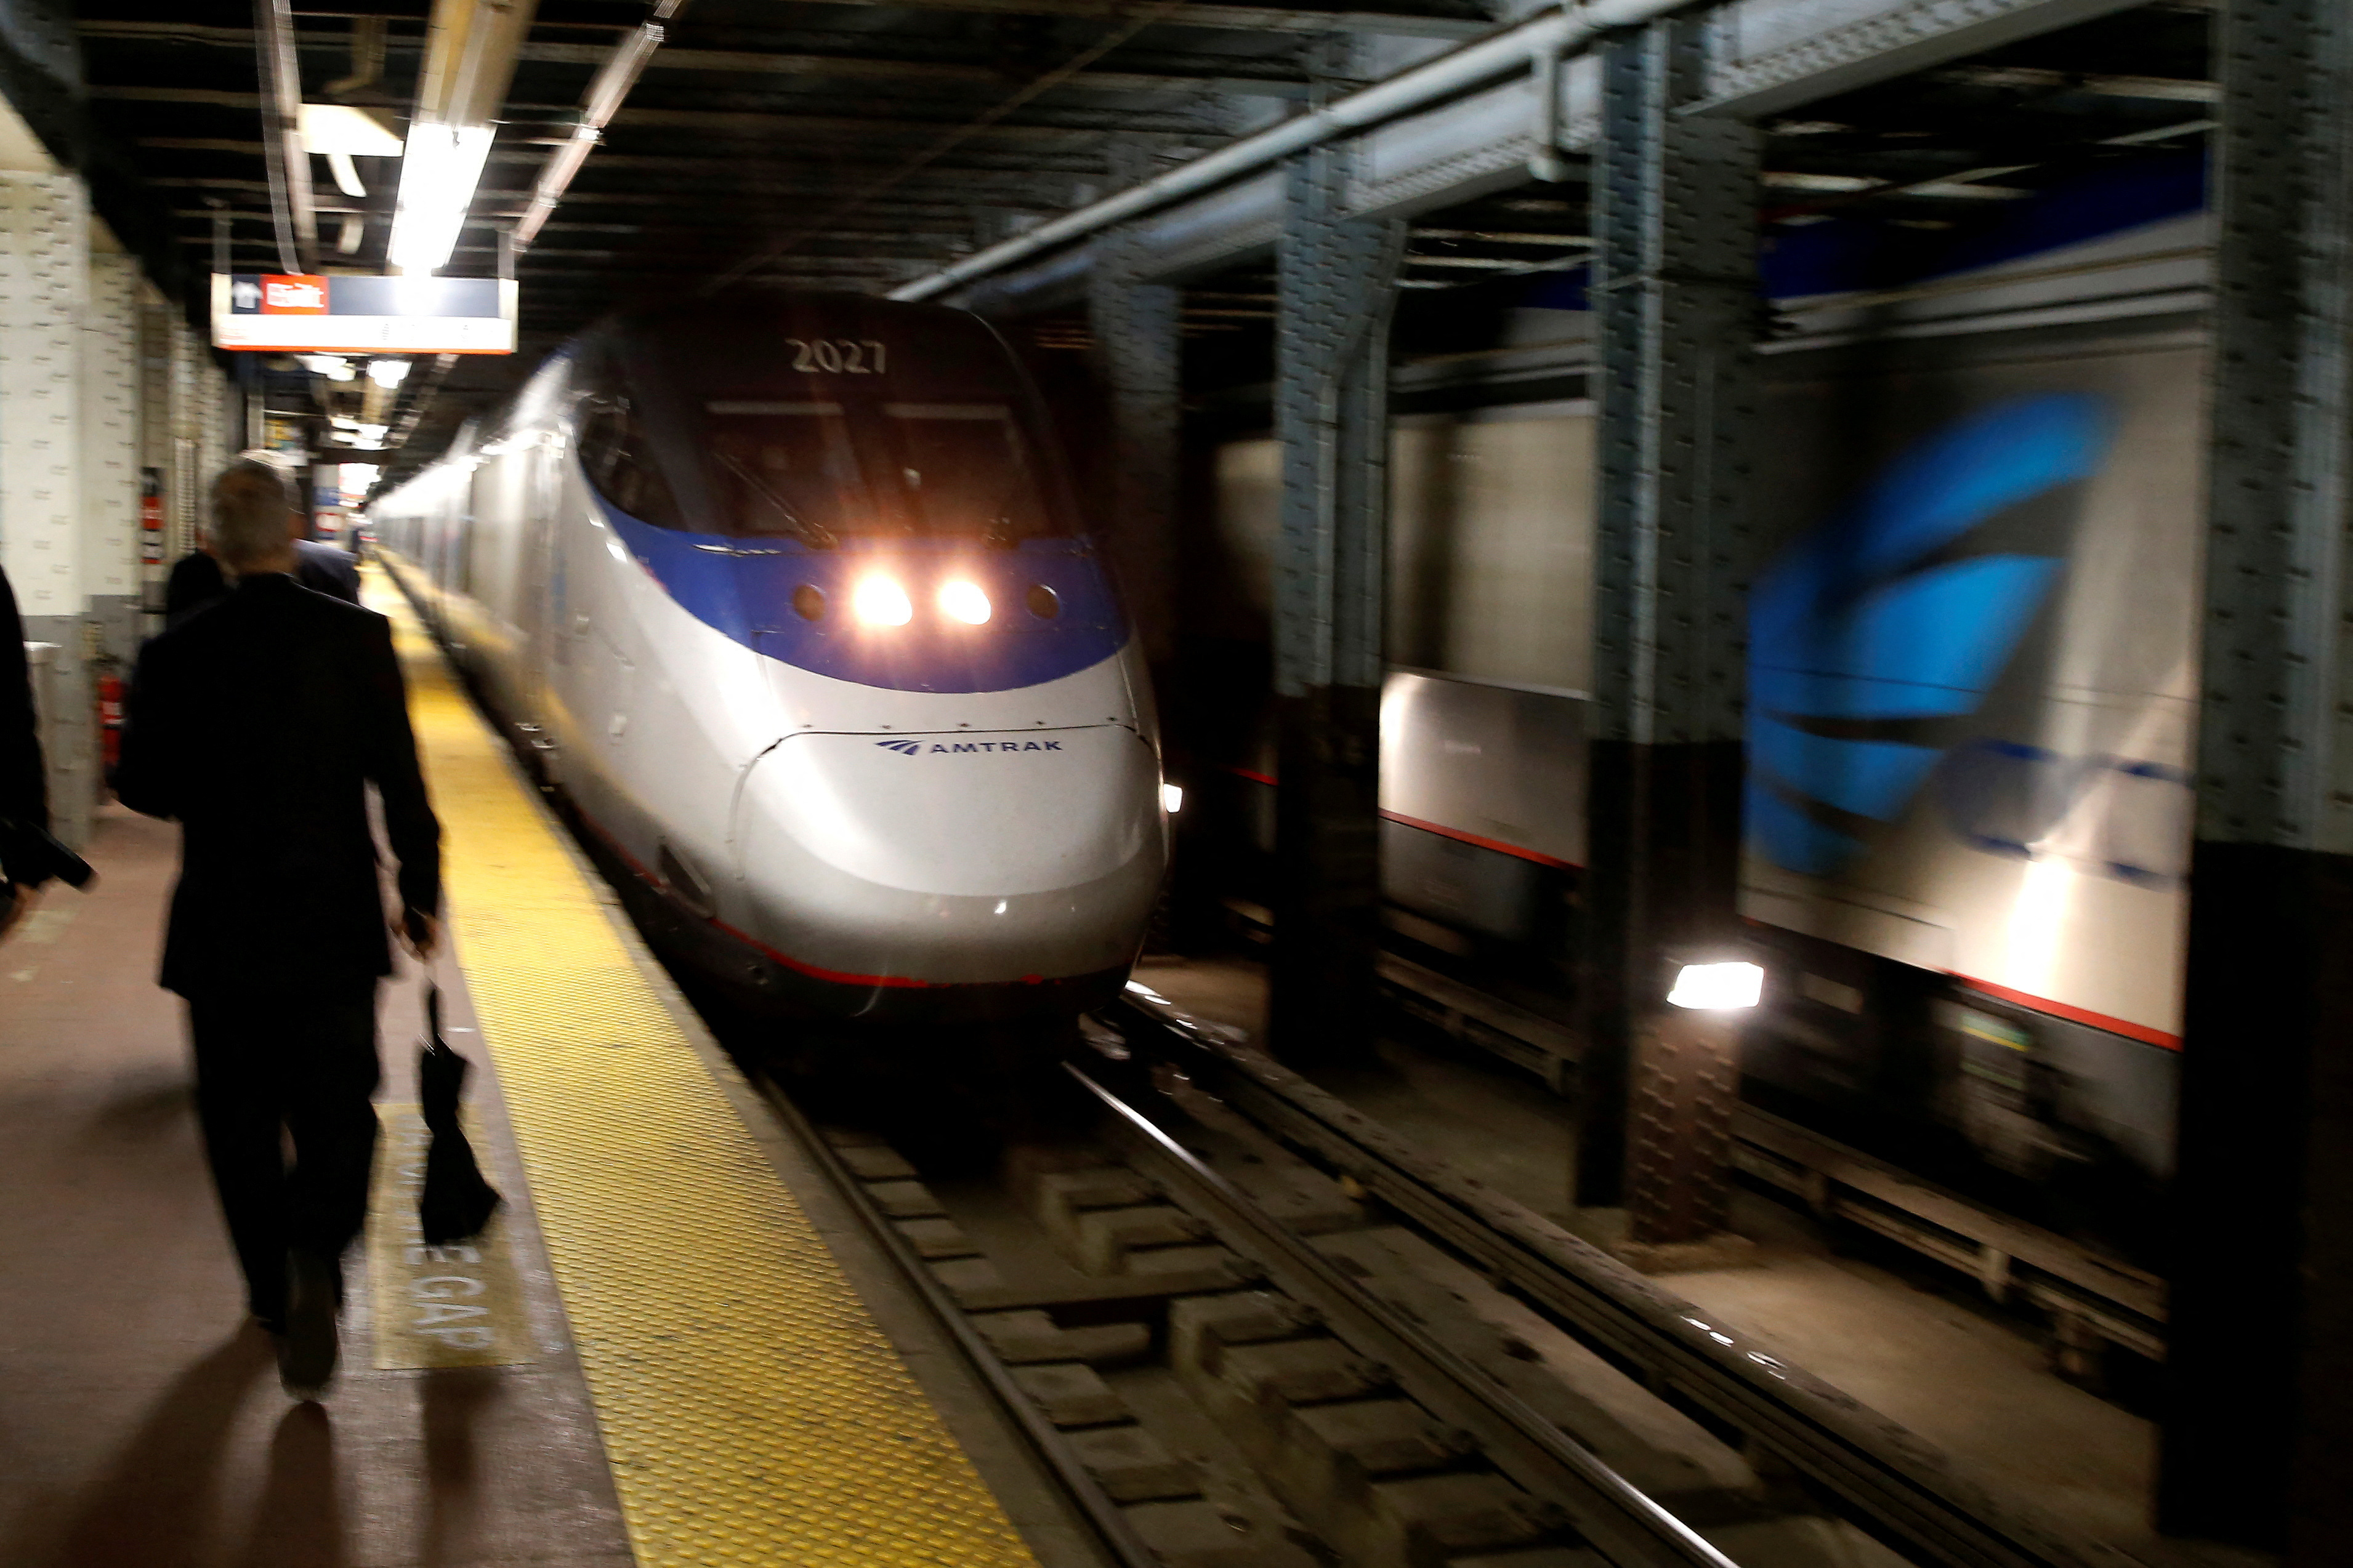 An Amtrak Acela train arrives at New York's Penn Station, the nation's busiest train hub, near a section of a complex of tracks that Amtrak says they will begin repairing over the summer in New York City